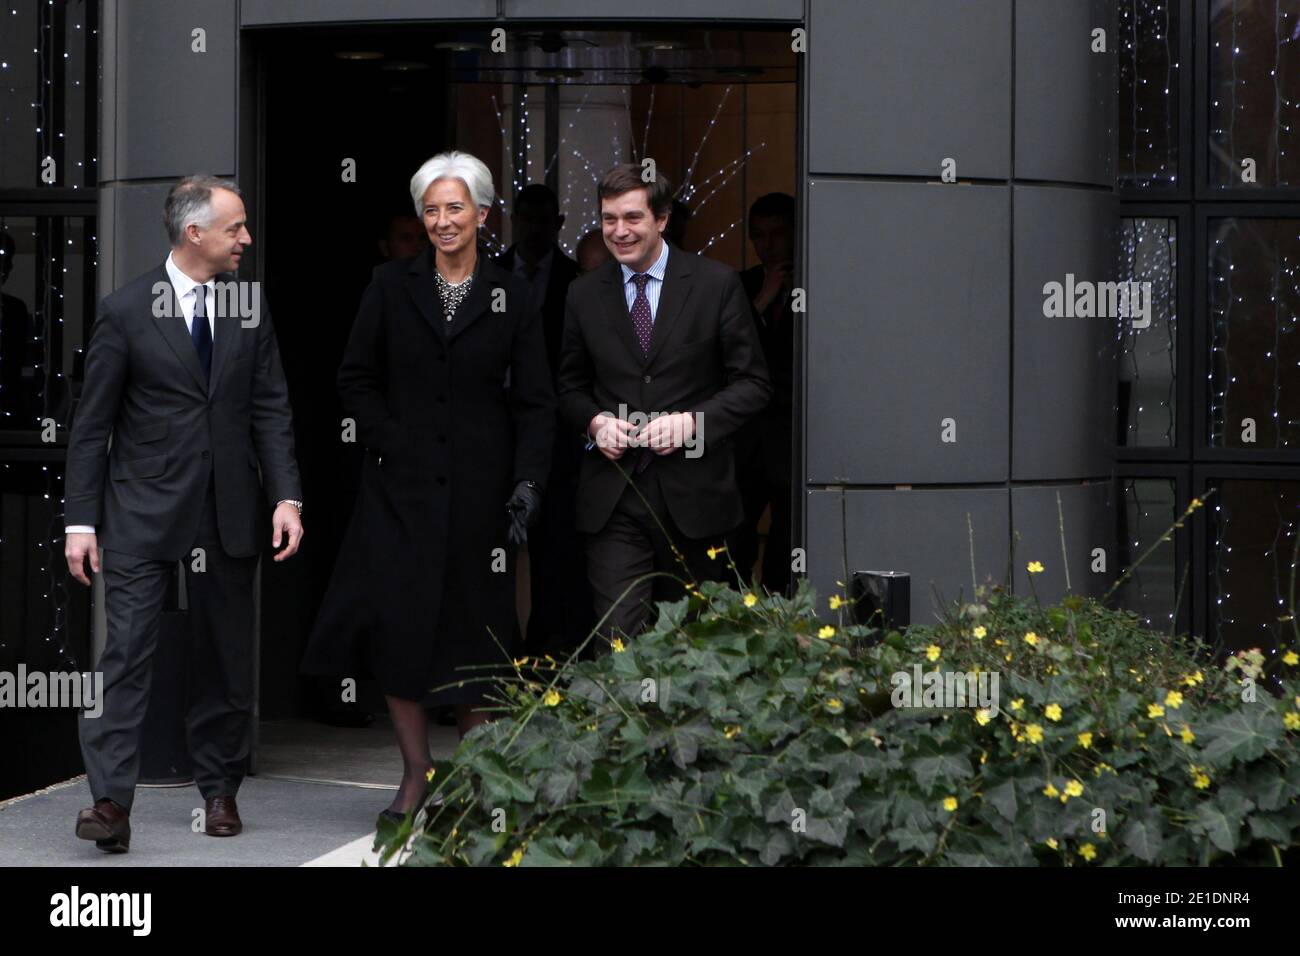 French Minister for the Economy, Finance and Industry Christine Lagarde flanked Peugeot Managing Director Vincent Rambaud arrives for drive an Ion Peugeot full electric, in Paris, France, on January 20, 2011. The Economy ministry will use the four seat four-door city ion car, launched at the end of 2010. Photo by Stephane Lemouton/ABACAPRESS.COM Stock Photo